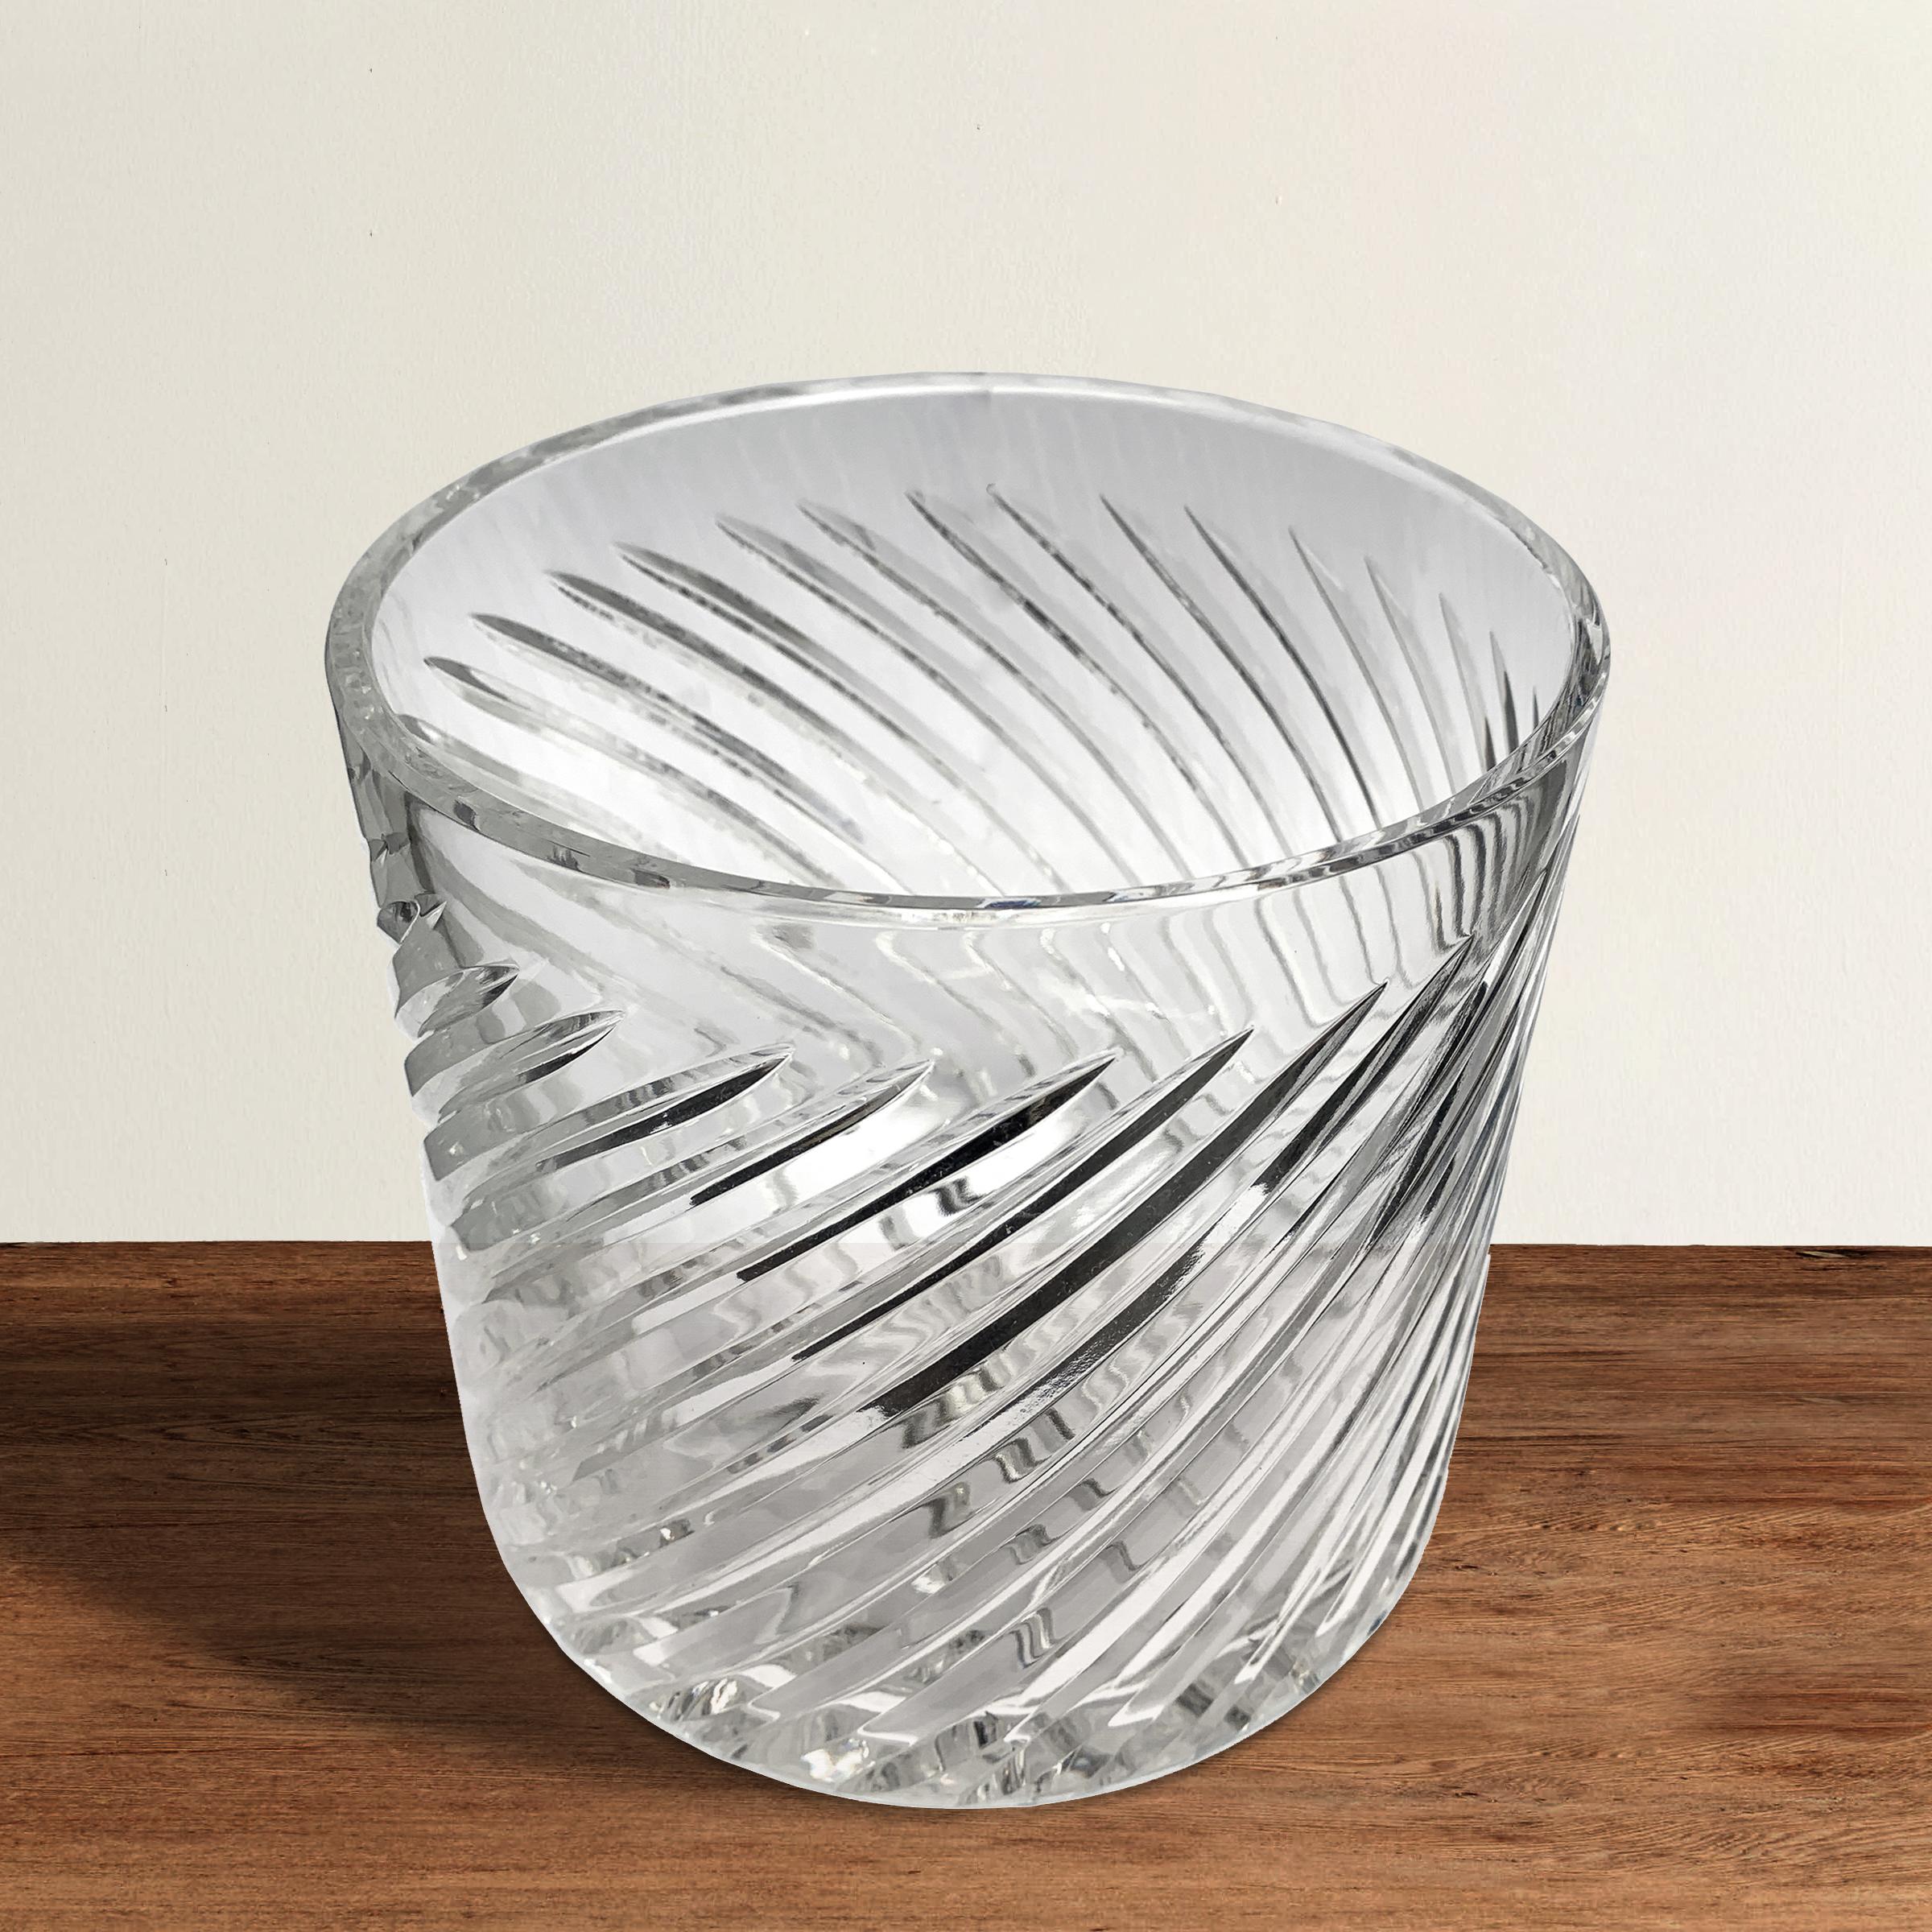 A vintage English heavy crystal ice bucket with a swirled pattern on the sides and a star on the bottom, all wheel-cut by hand, by a master cutter.